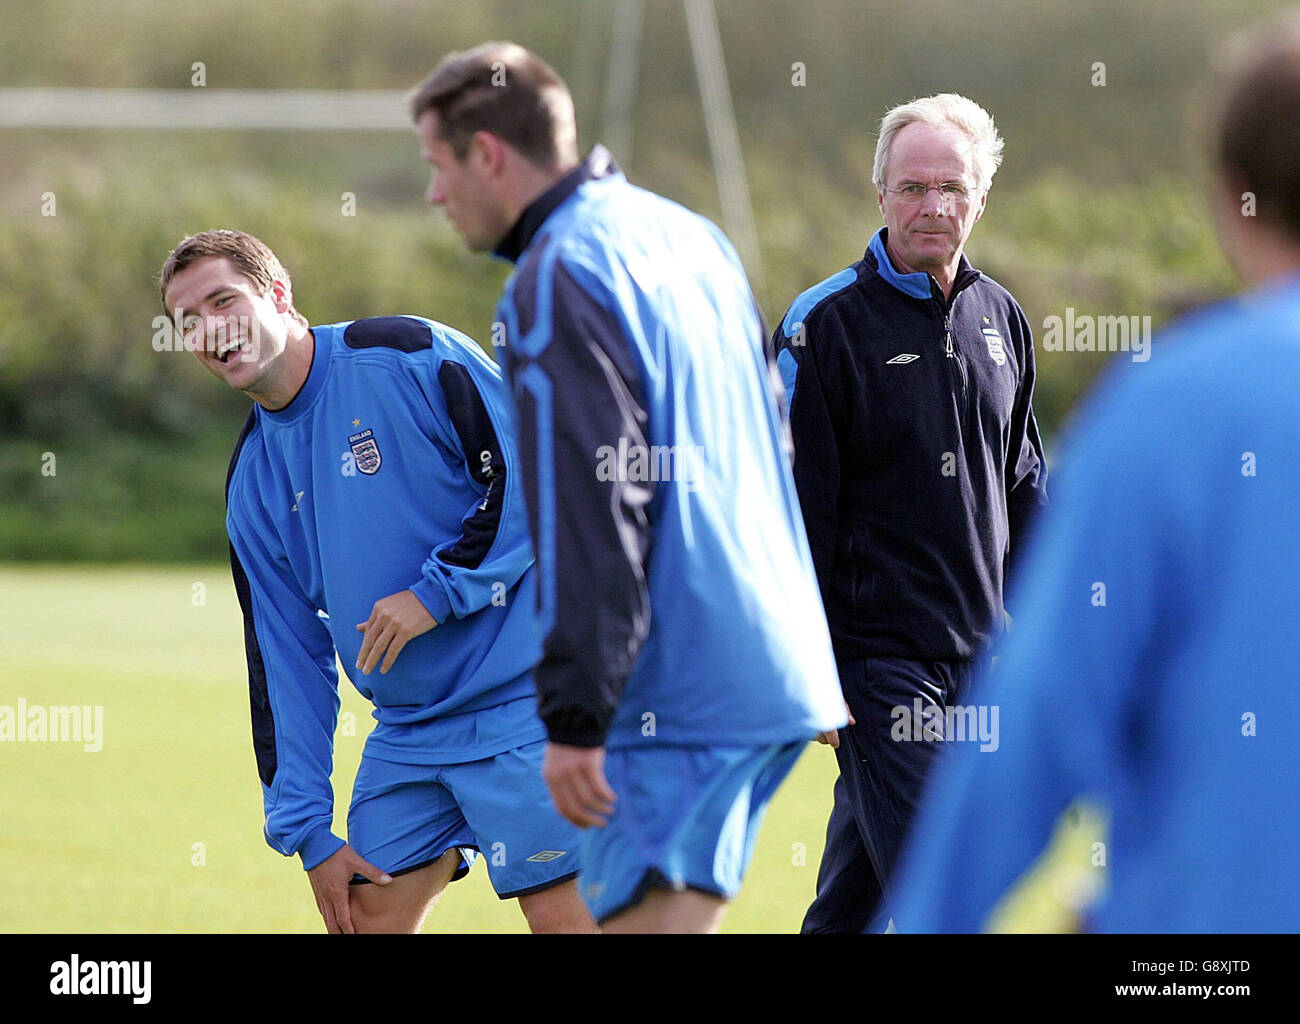 England manager Sven-Goran Eriksson keeps an eye on Michael Owen and Jamie Carragher (C) during a training session at Carrington training ground, Manchester, Monday October 10, 2005, ahead of their World Cup qualifying match against Poland on Wednesday. PRESS ASSOCIATION Photo. Photo credit should read: Martin Rickett/PA. Stock Photo